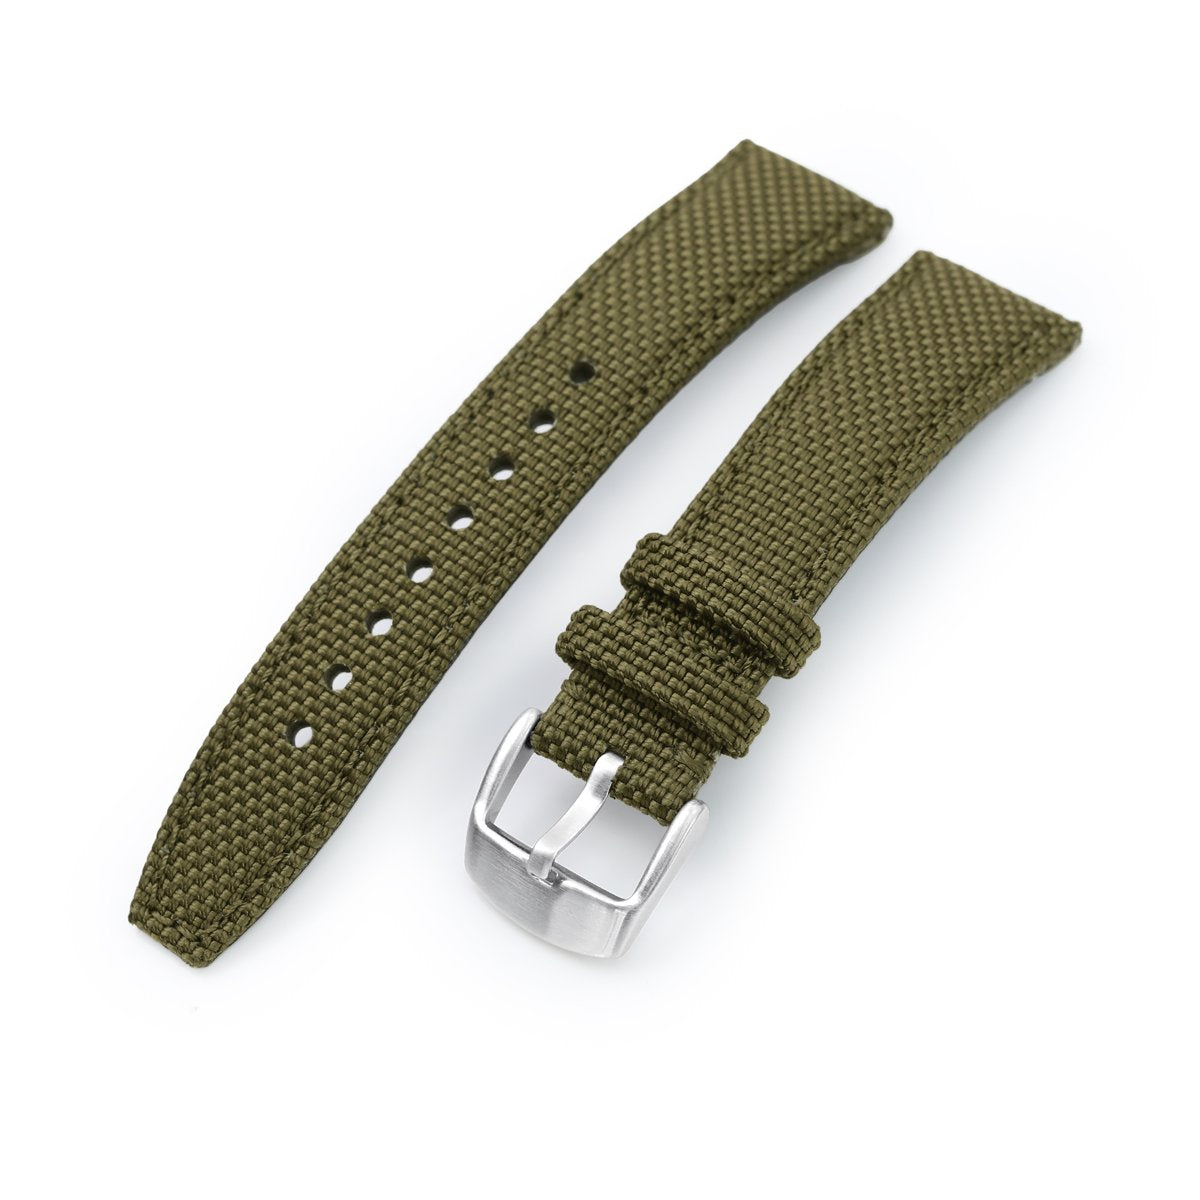 20mm, 21mm or 22mm Strong Texture Woven Nylon Black Watch Strap